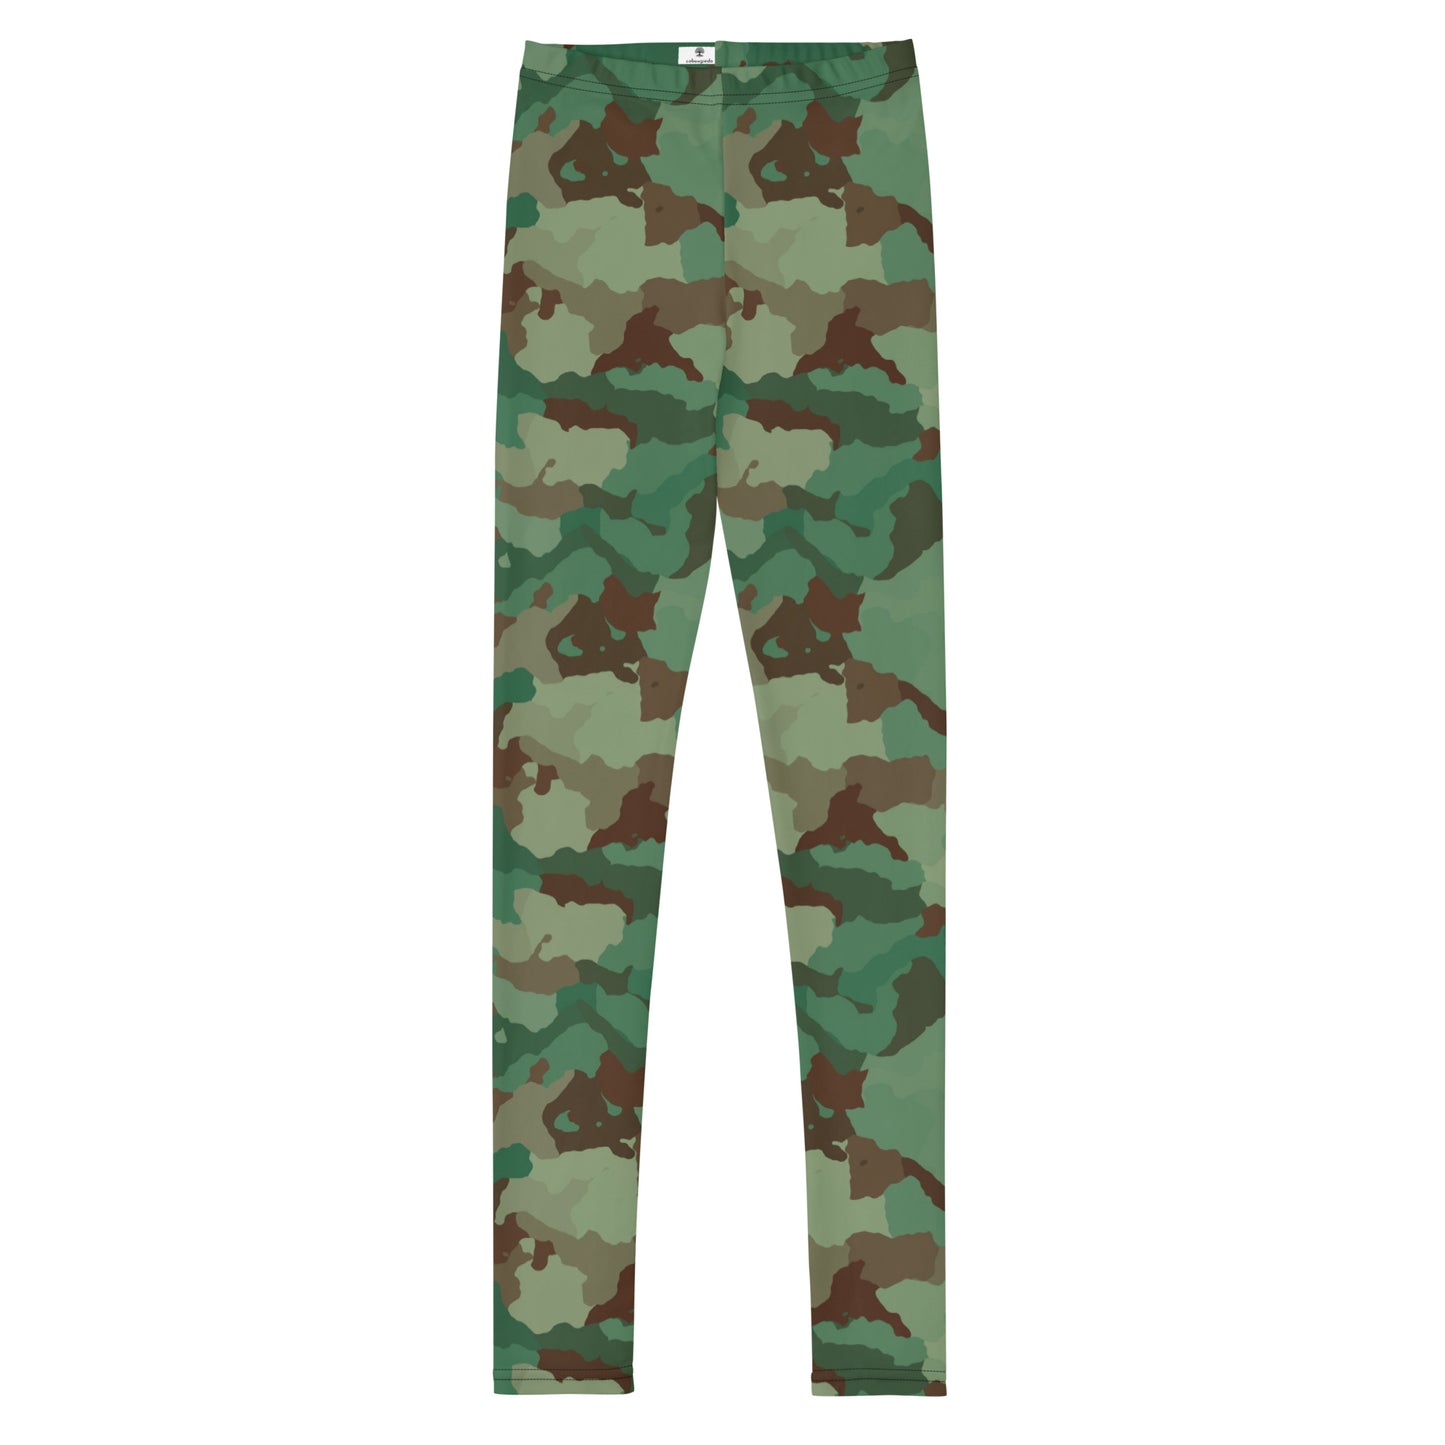 Youth Leggings - Green Brown & Black Camouflage